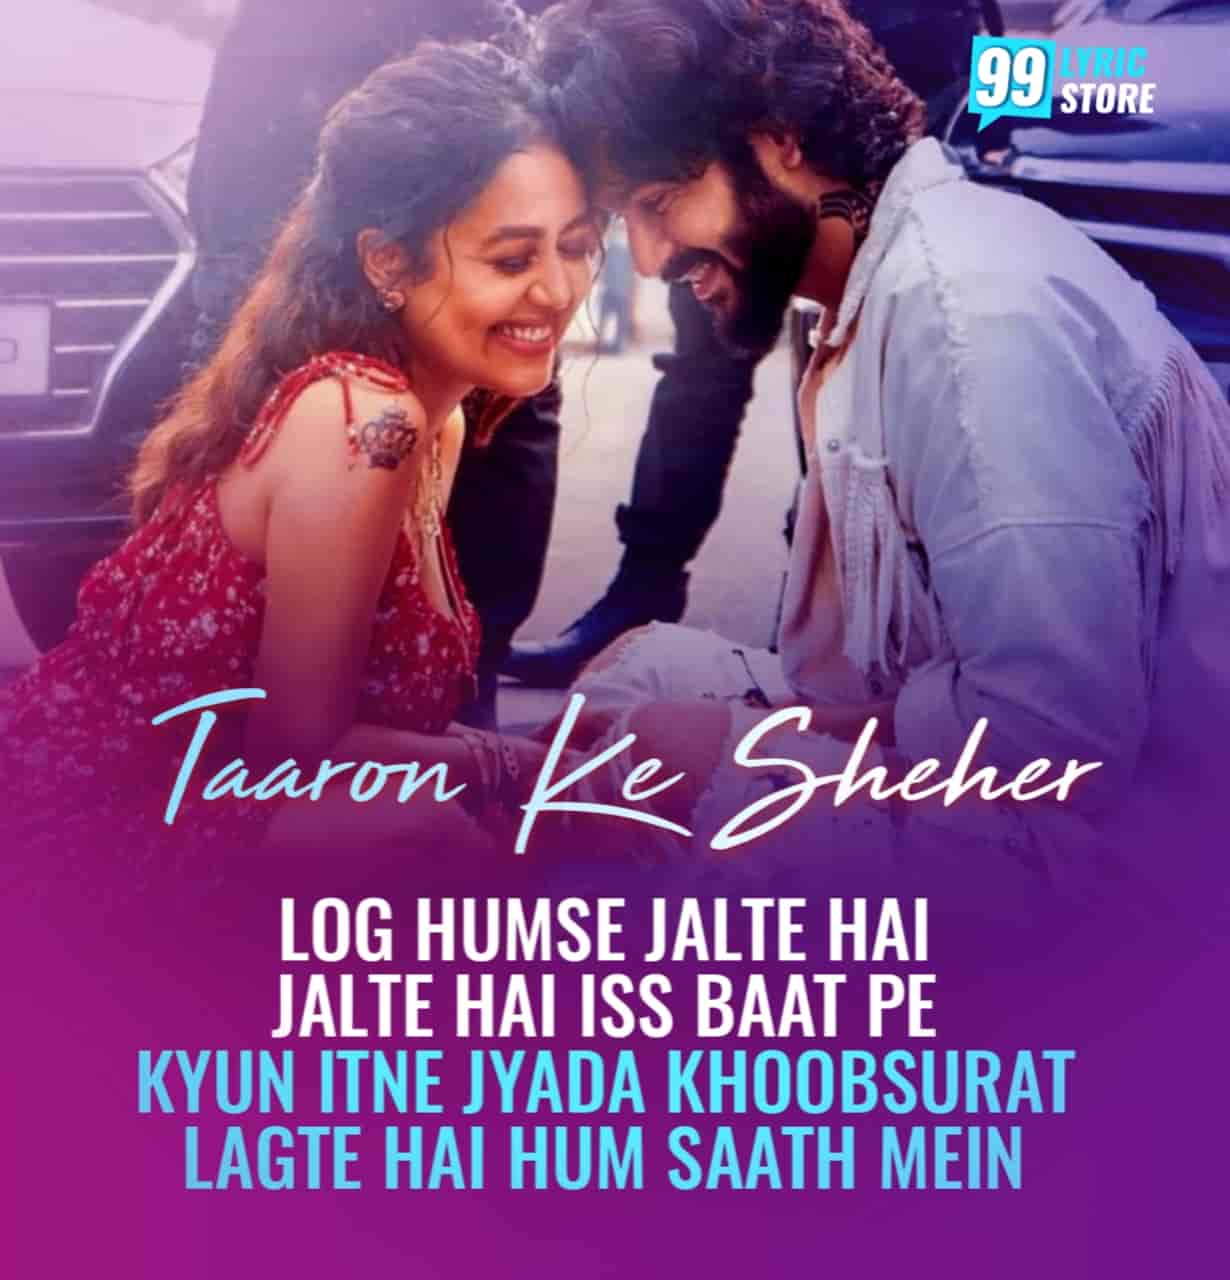 Indian artists Neha Kakkar and Jubin Nautiyal given their melodious voices in a beautiful love song which is titled Taaron Ke Sheher has released.